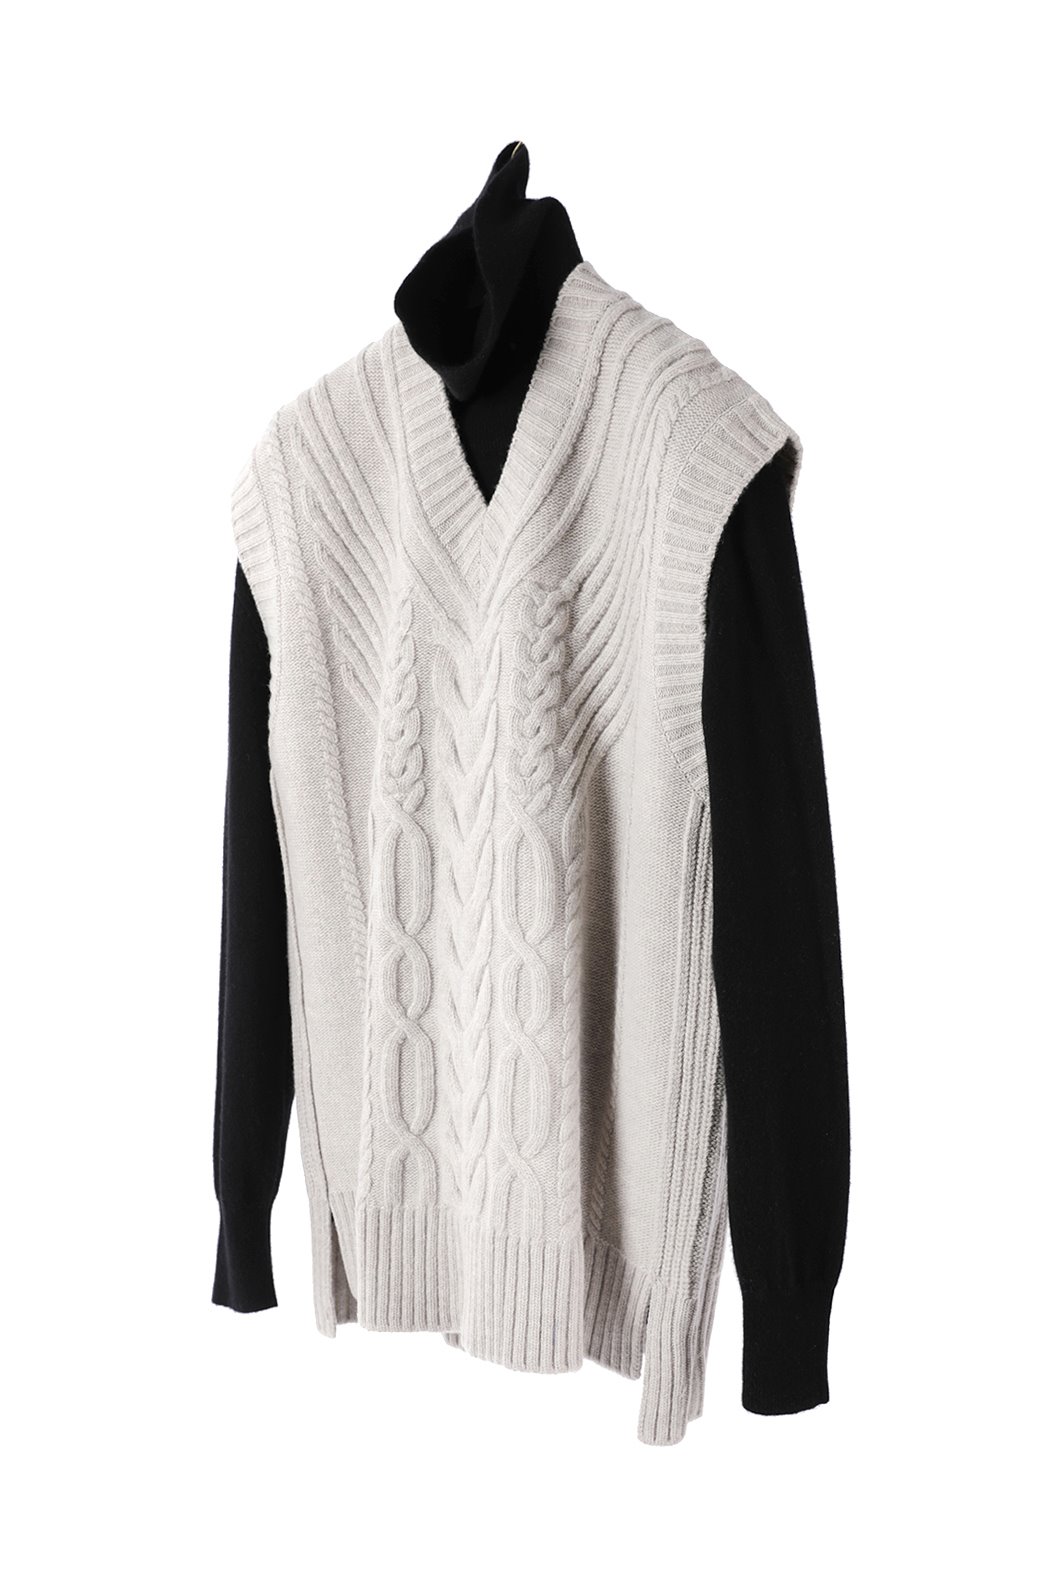 Cashmere Cable Knitting Over Vest-2Color